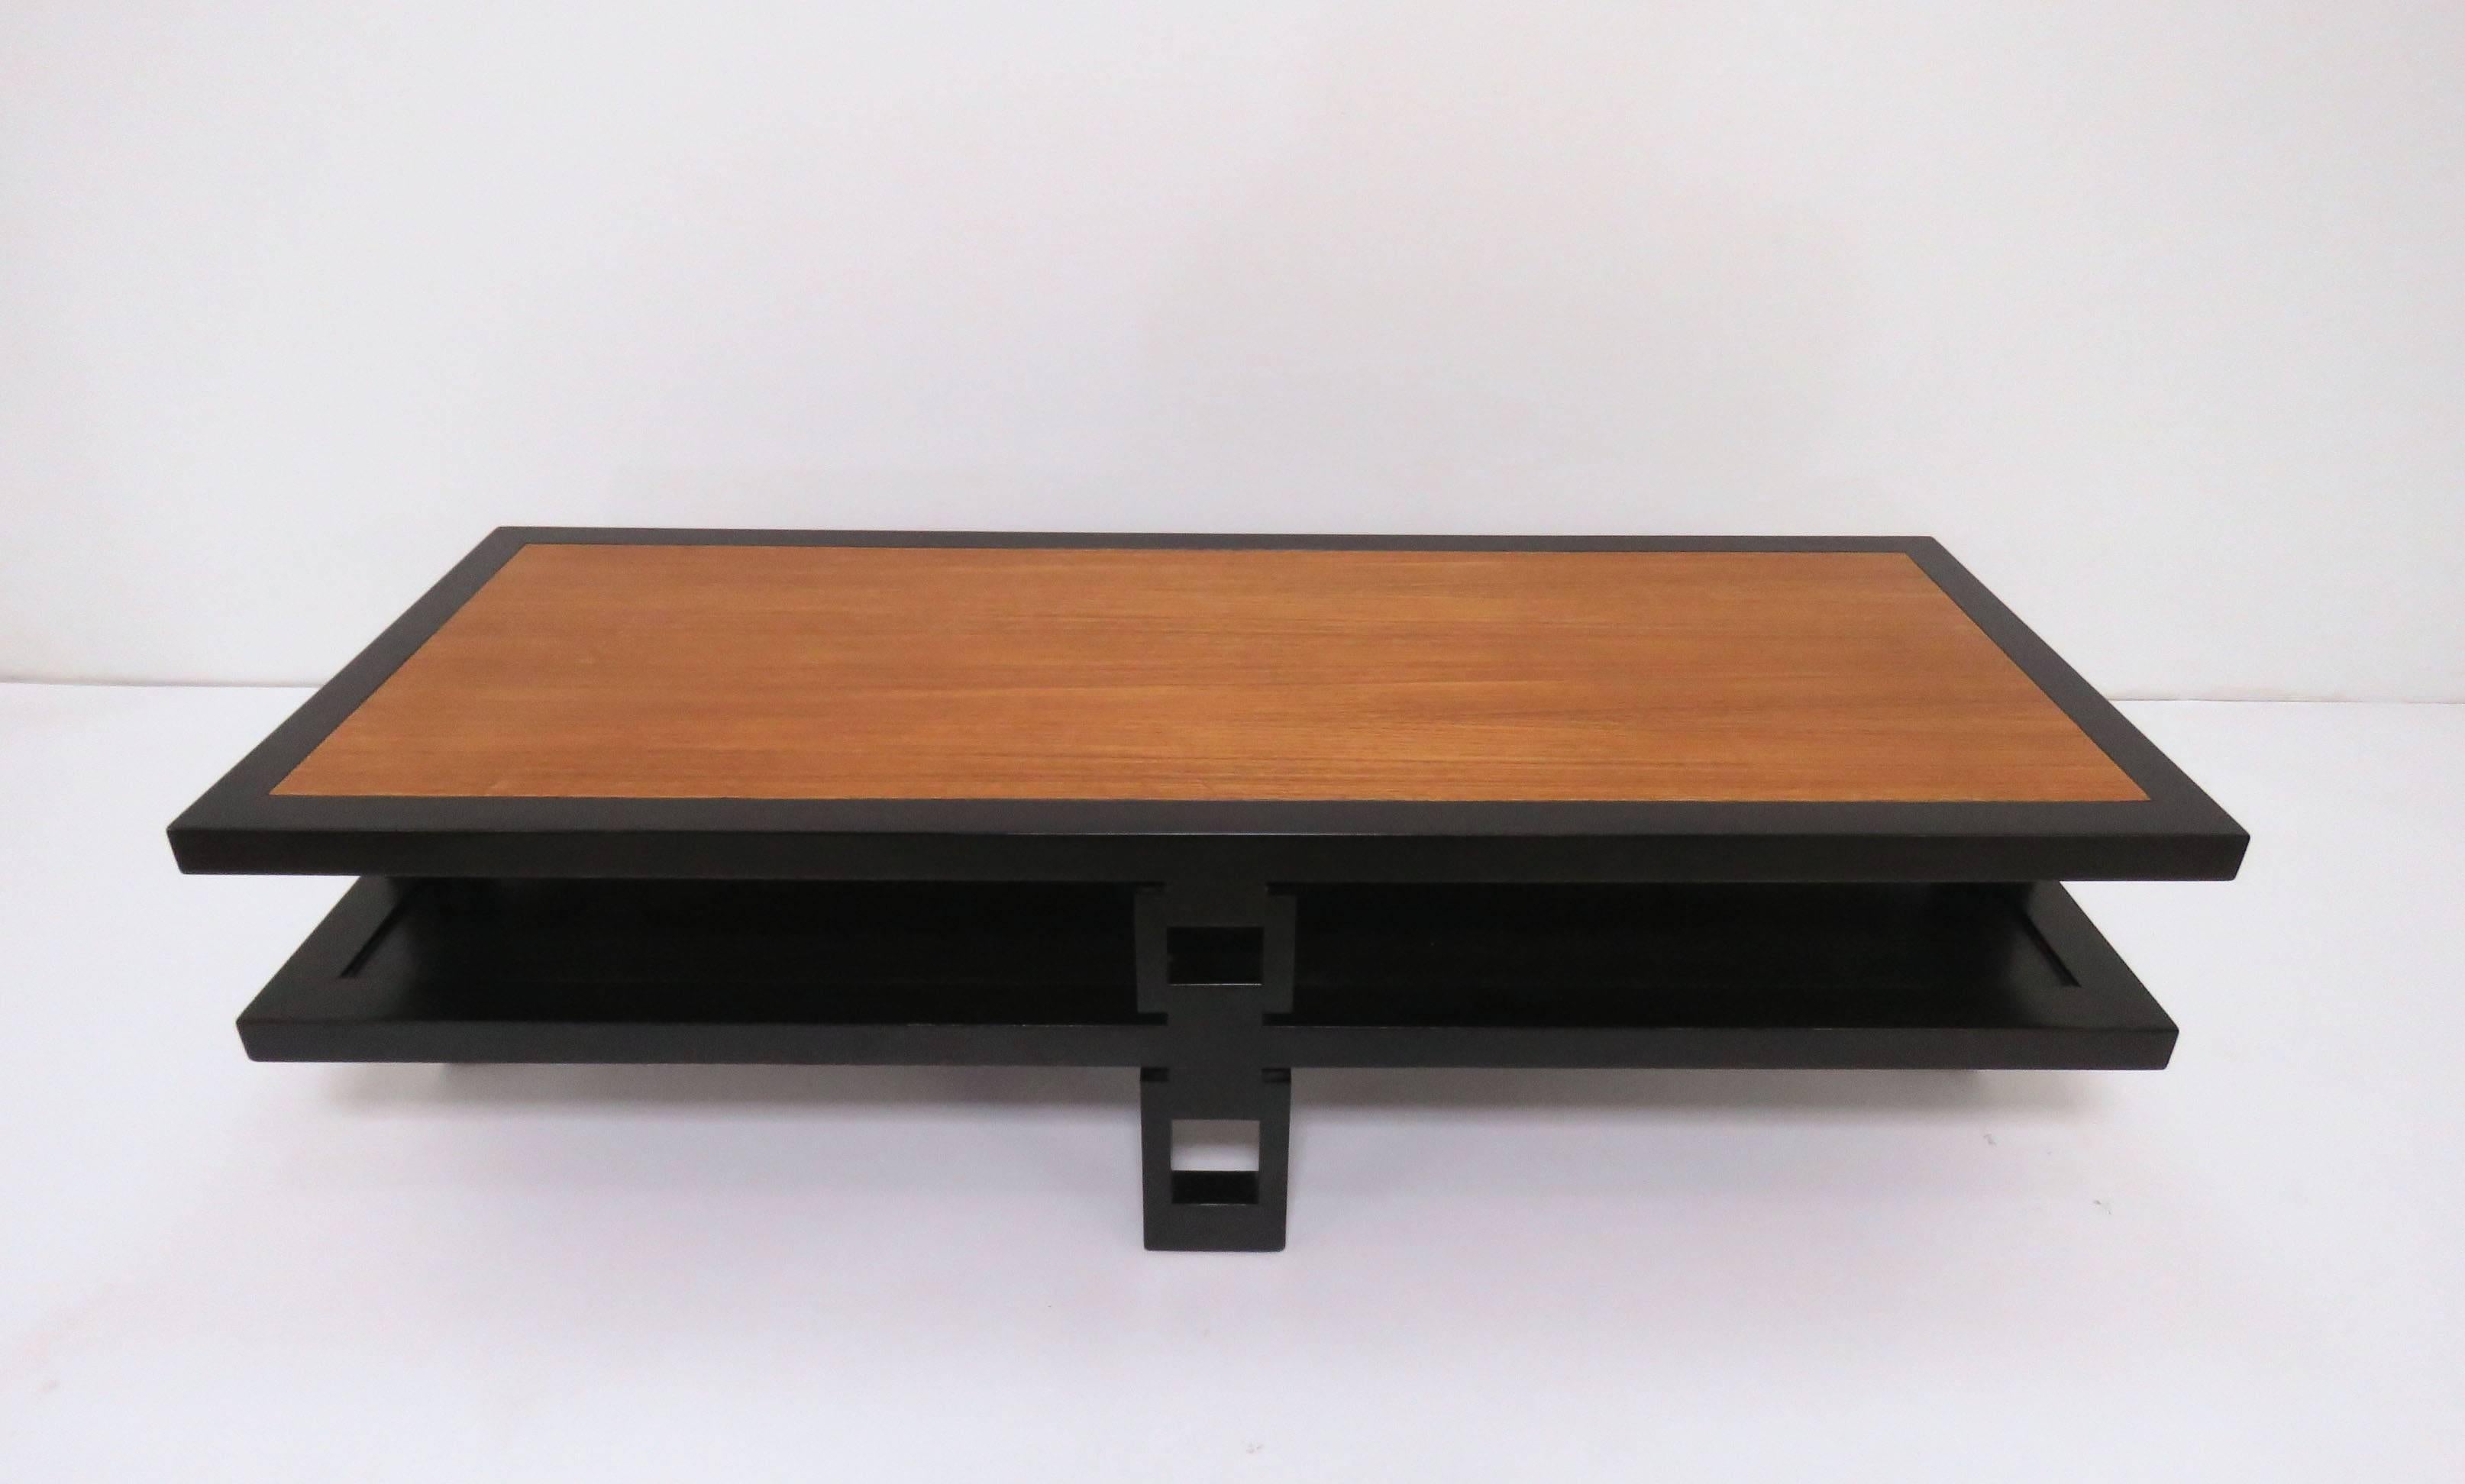 Wood Signed James Mont Asian Style Two-Tone Coffee Table, circa 1940s